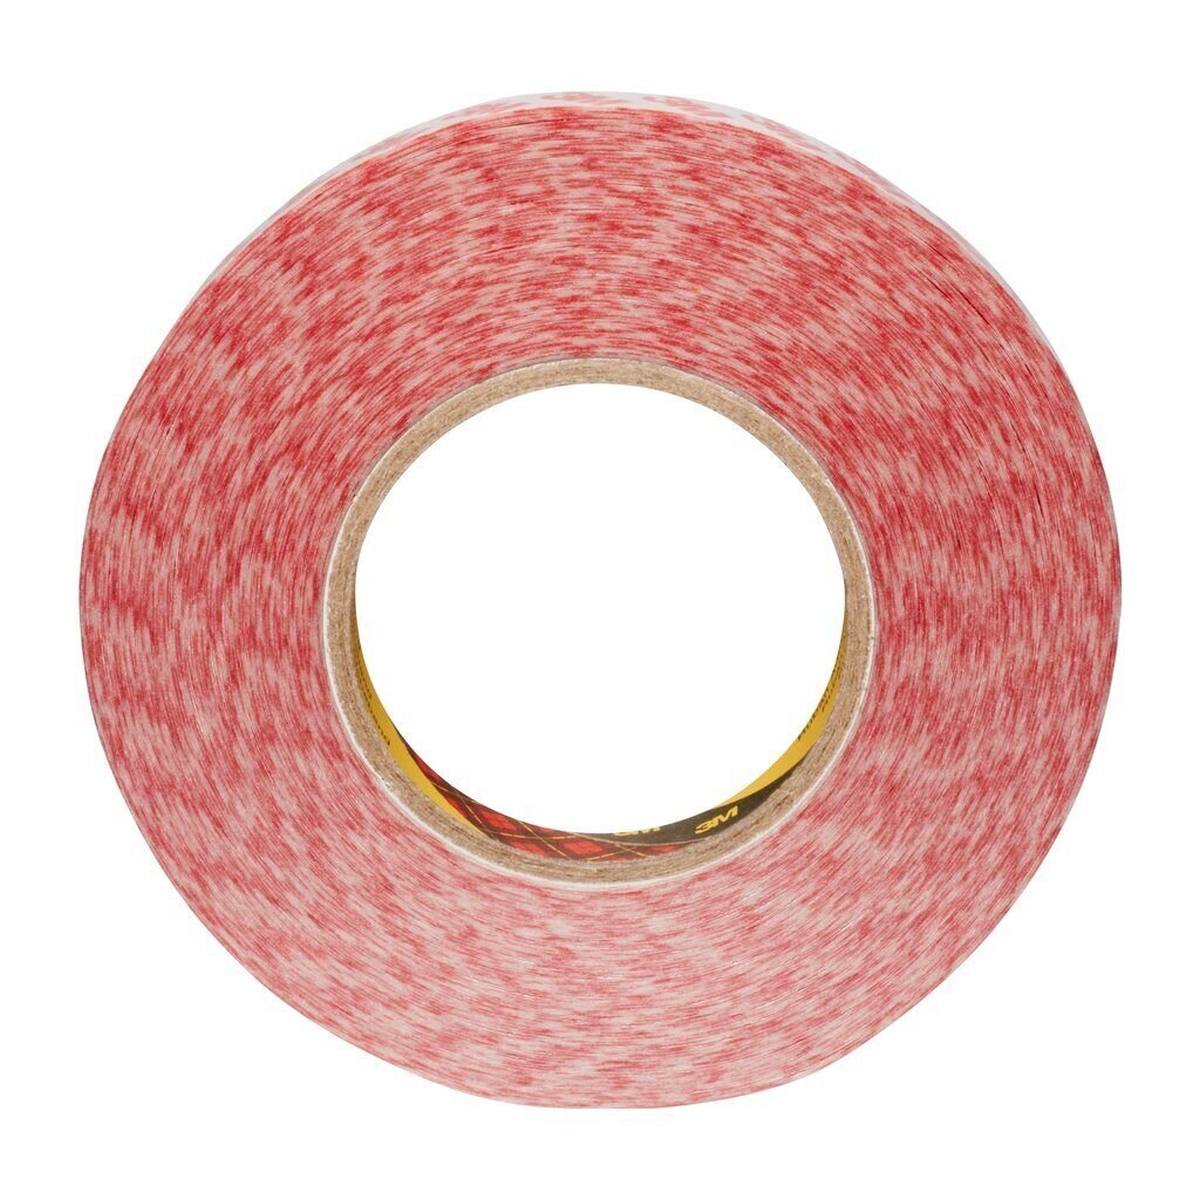 3M Double-sided adhesive tape with polyester backing 9088-200, transparent, 15 mm x 50 m, 0.2 mm